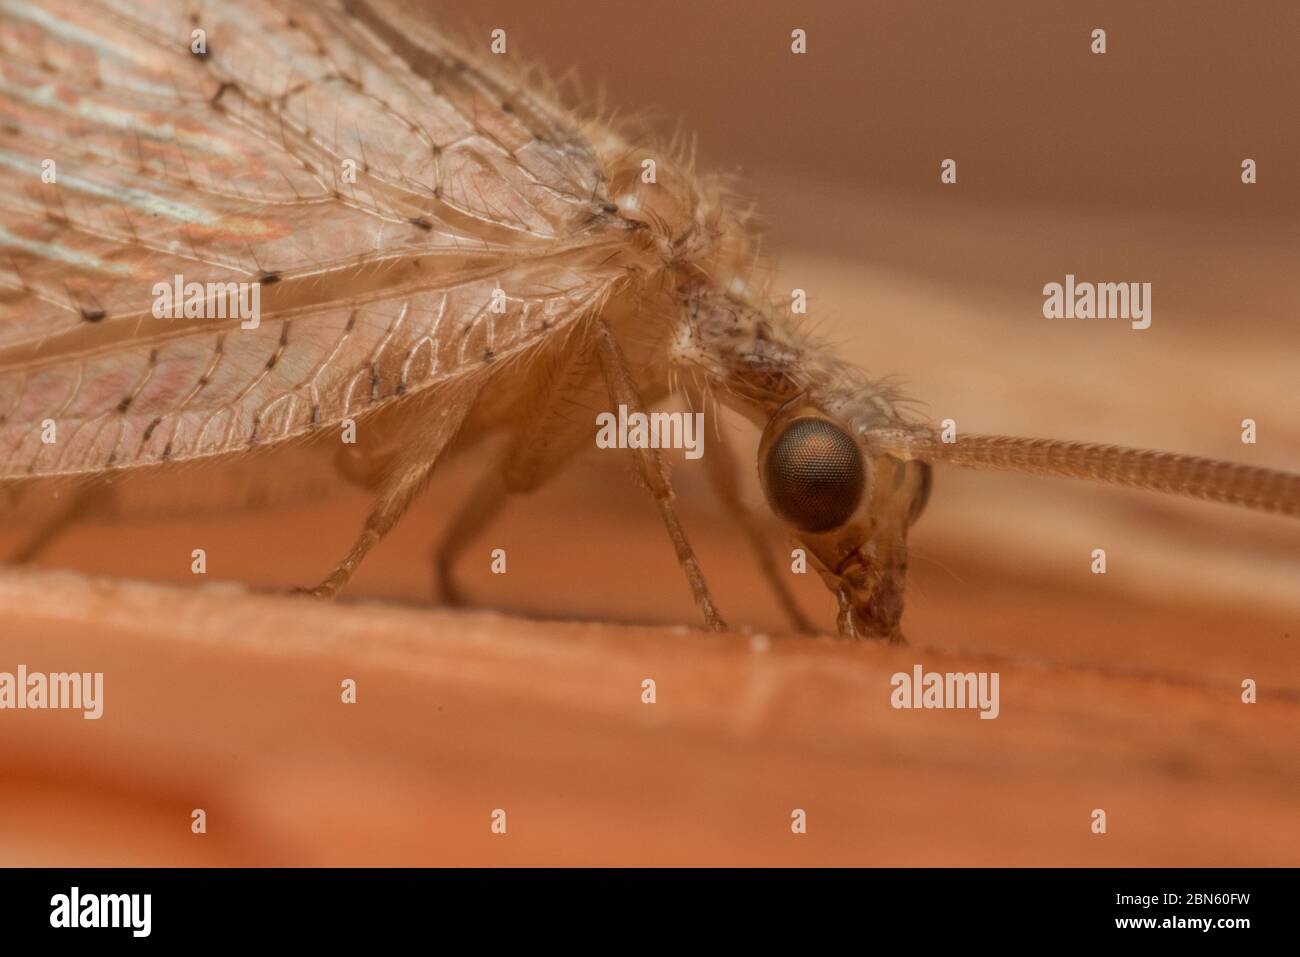 A brown lacewing (Hemerobius species) from a garden in Berkeley, California. These insects are useful to have around as they eat pests. Stock Photo